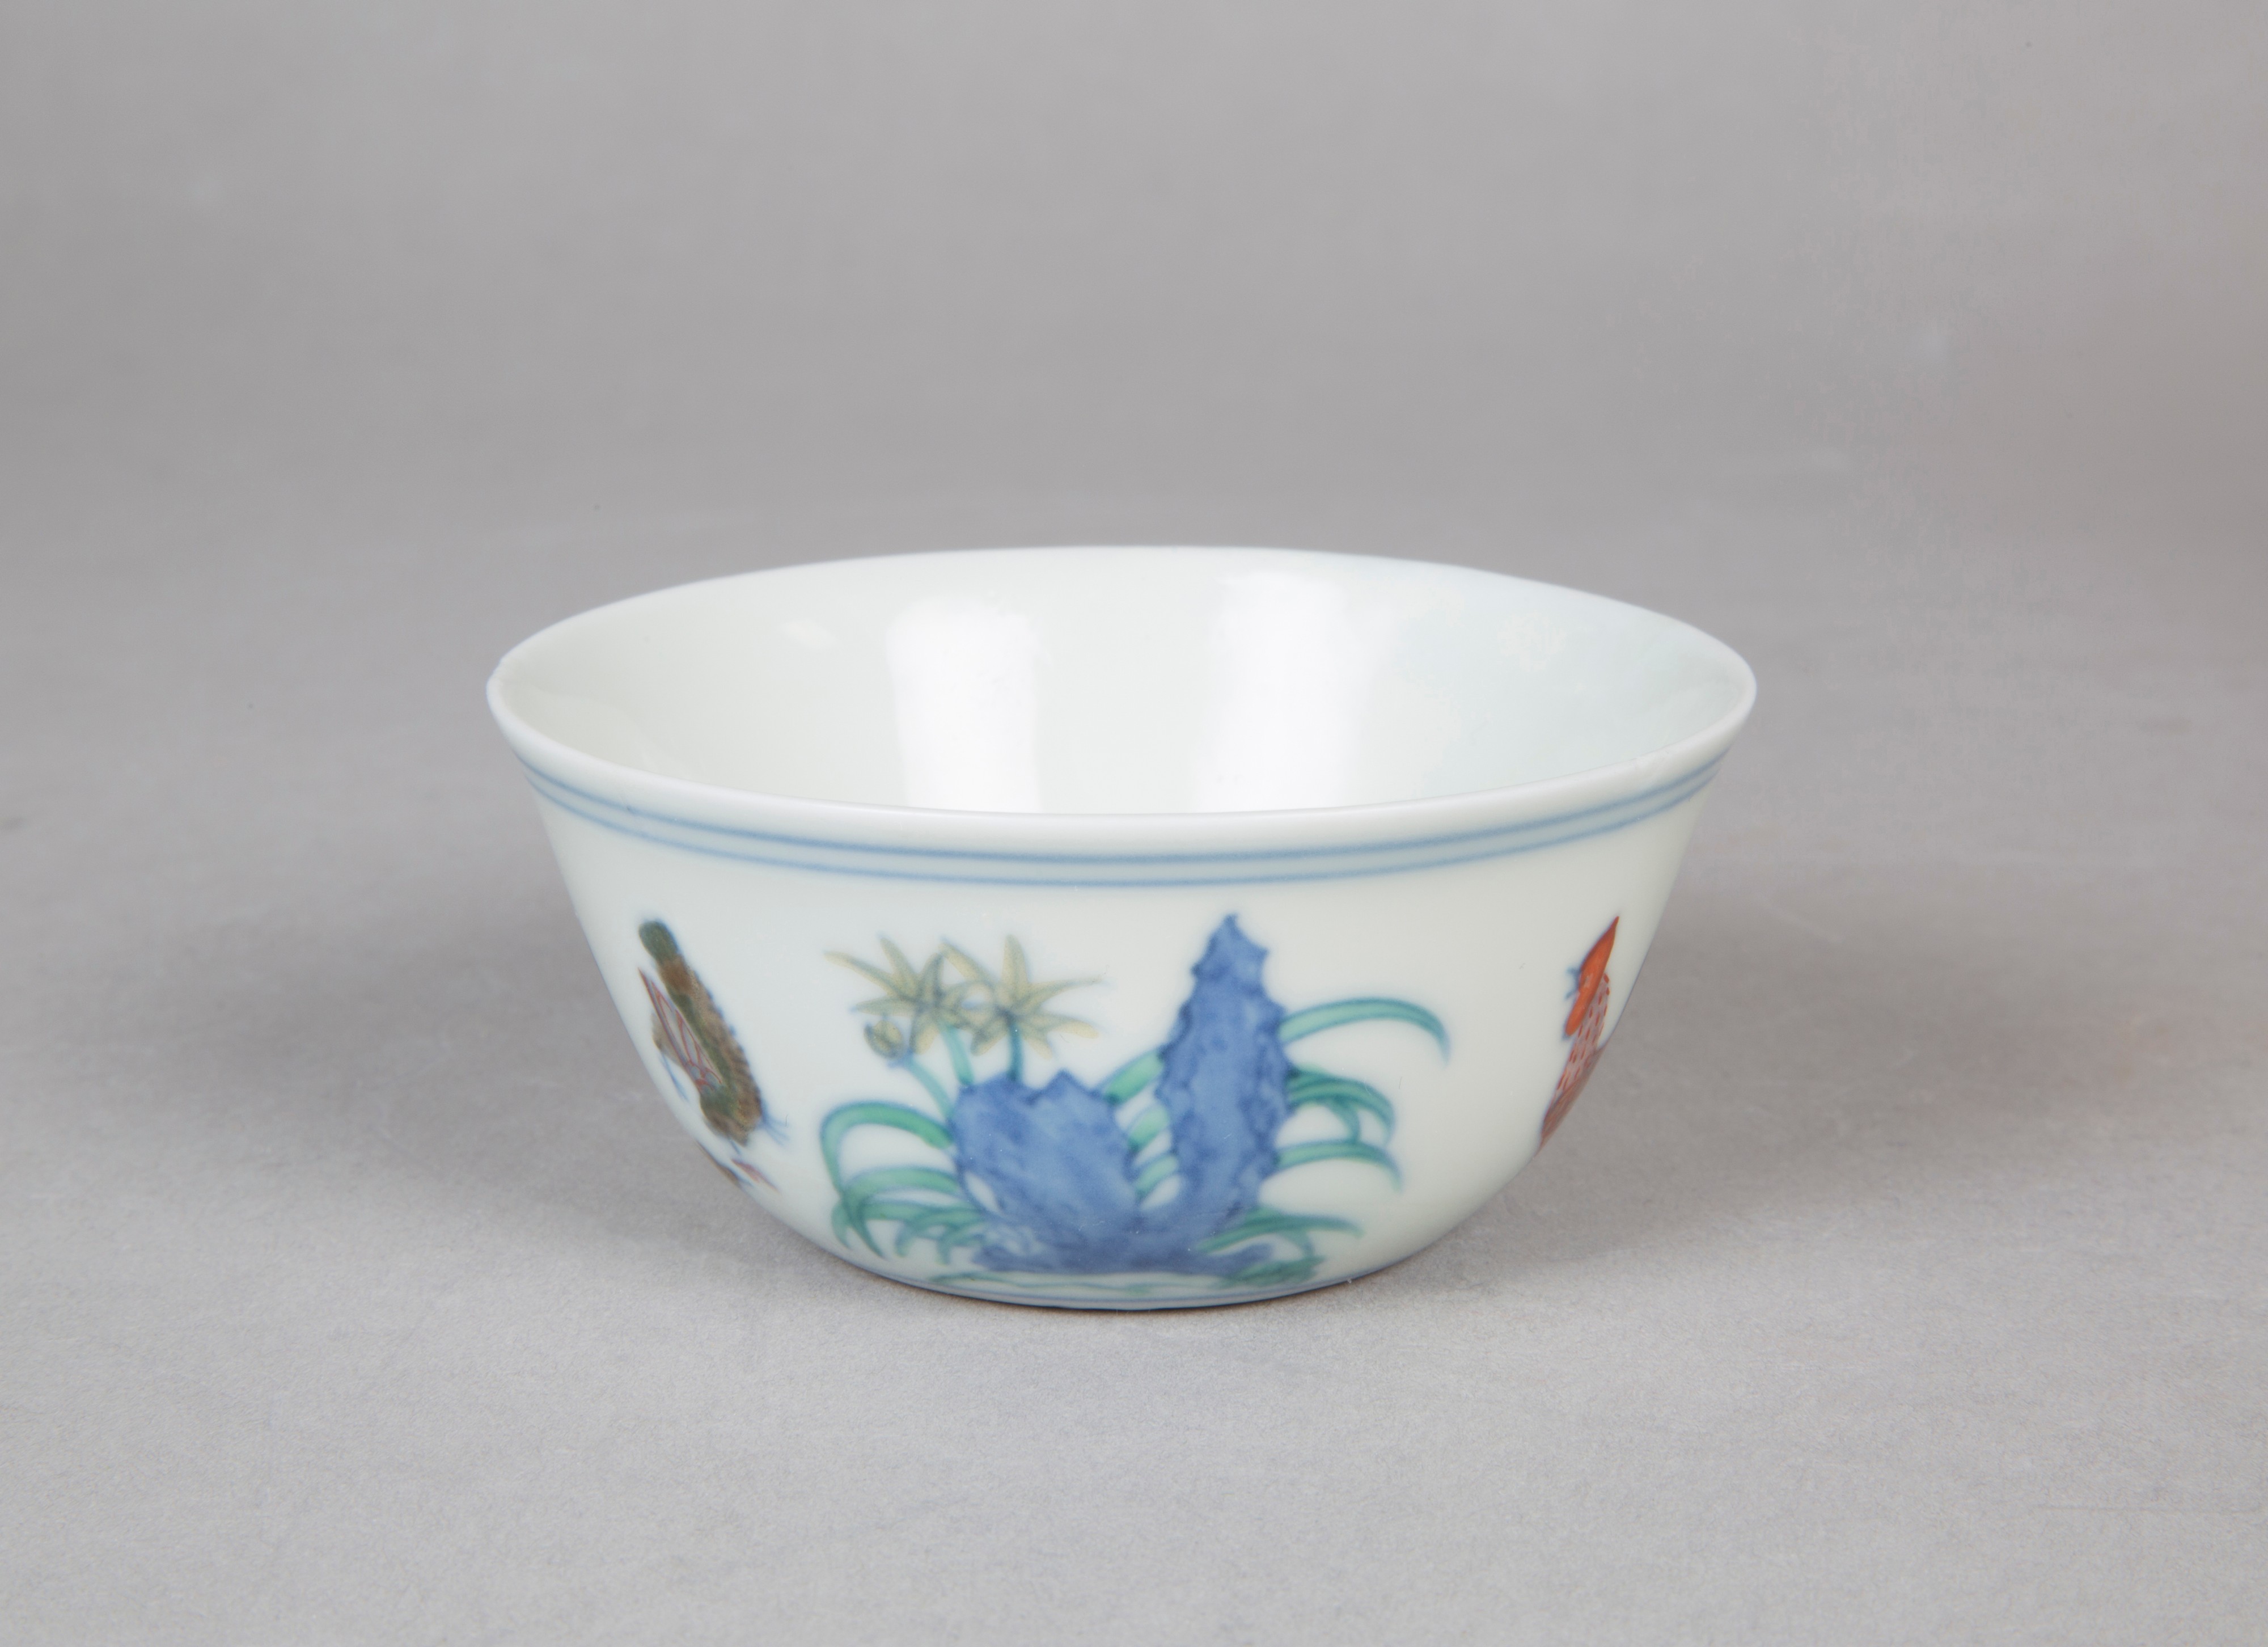 Chicken Cup | China | Ming dynasty (1368–1644), Chenghua mark and